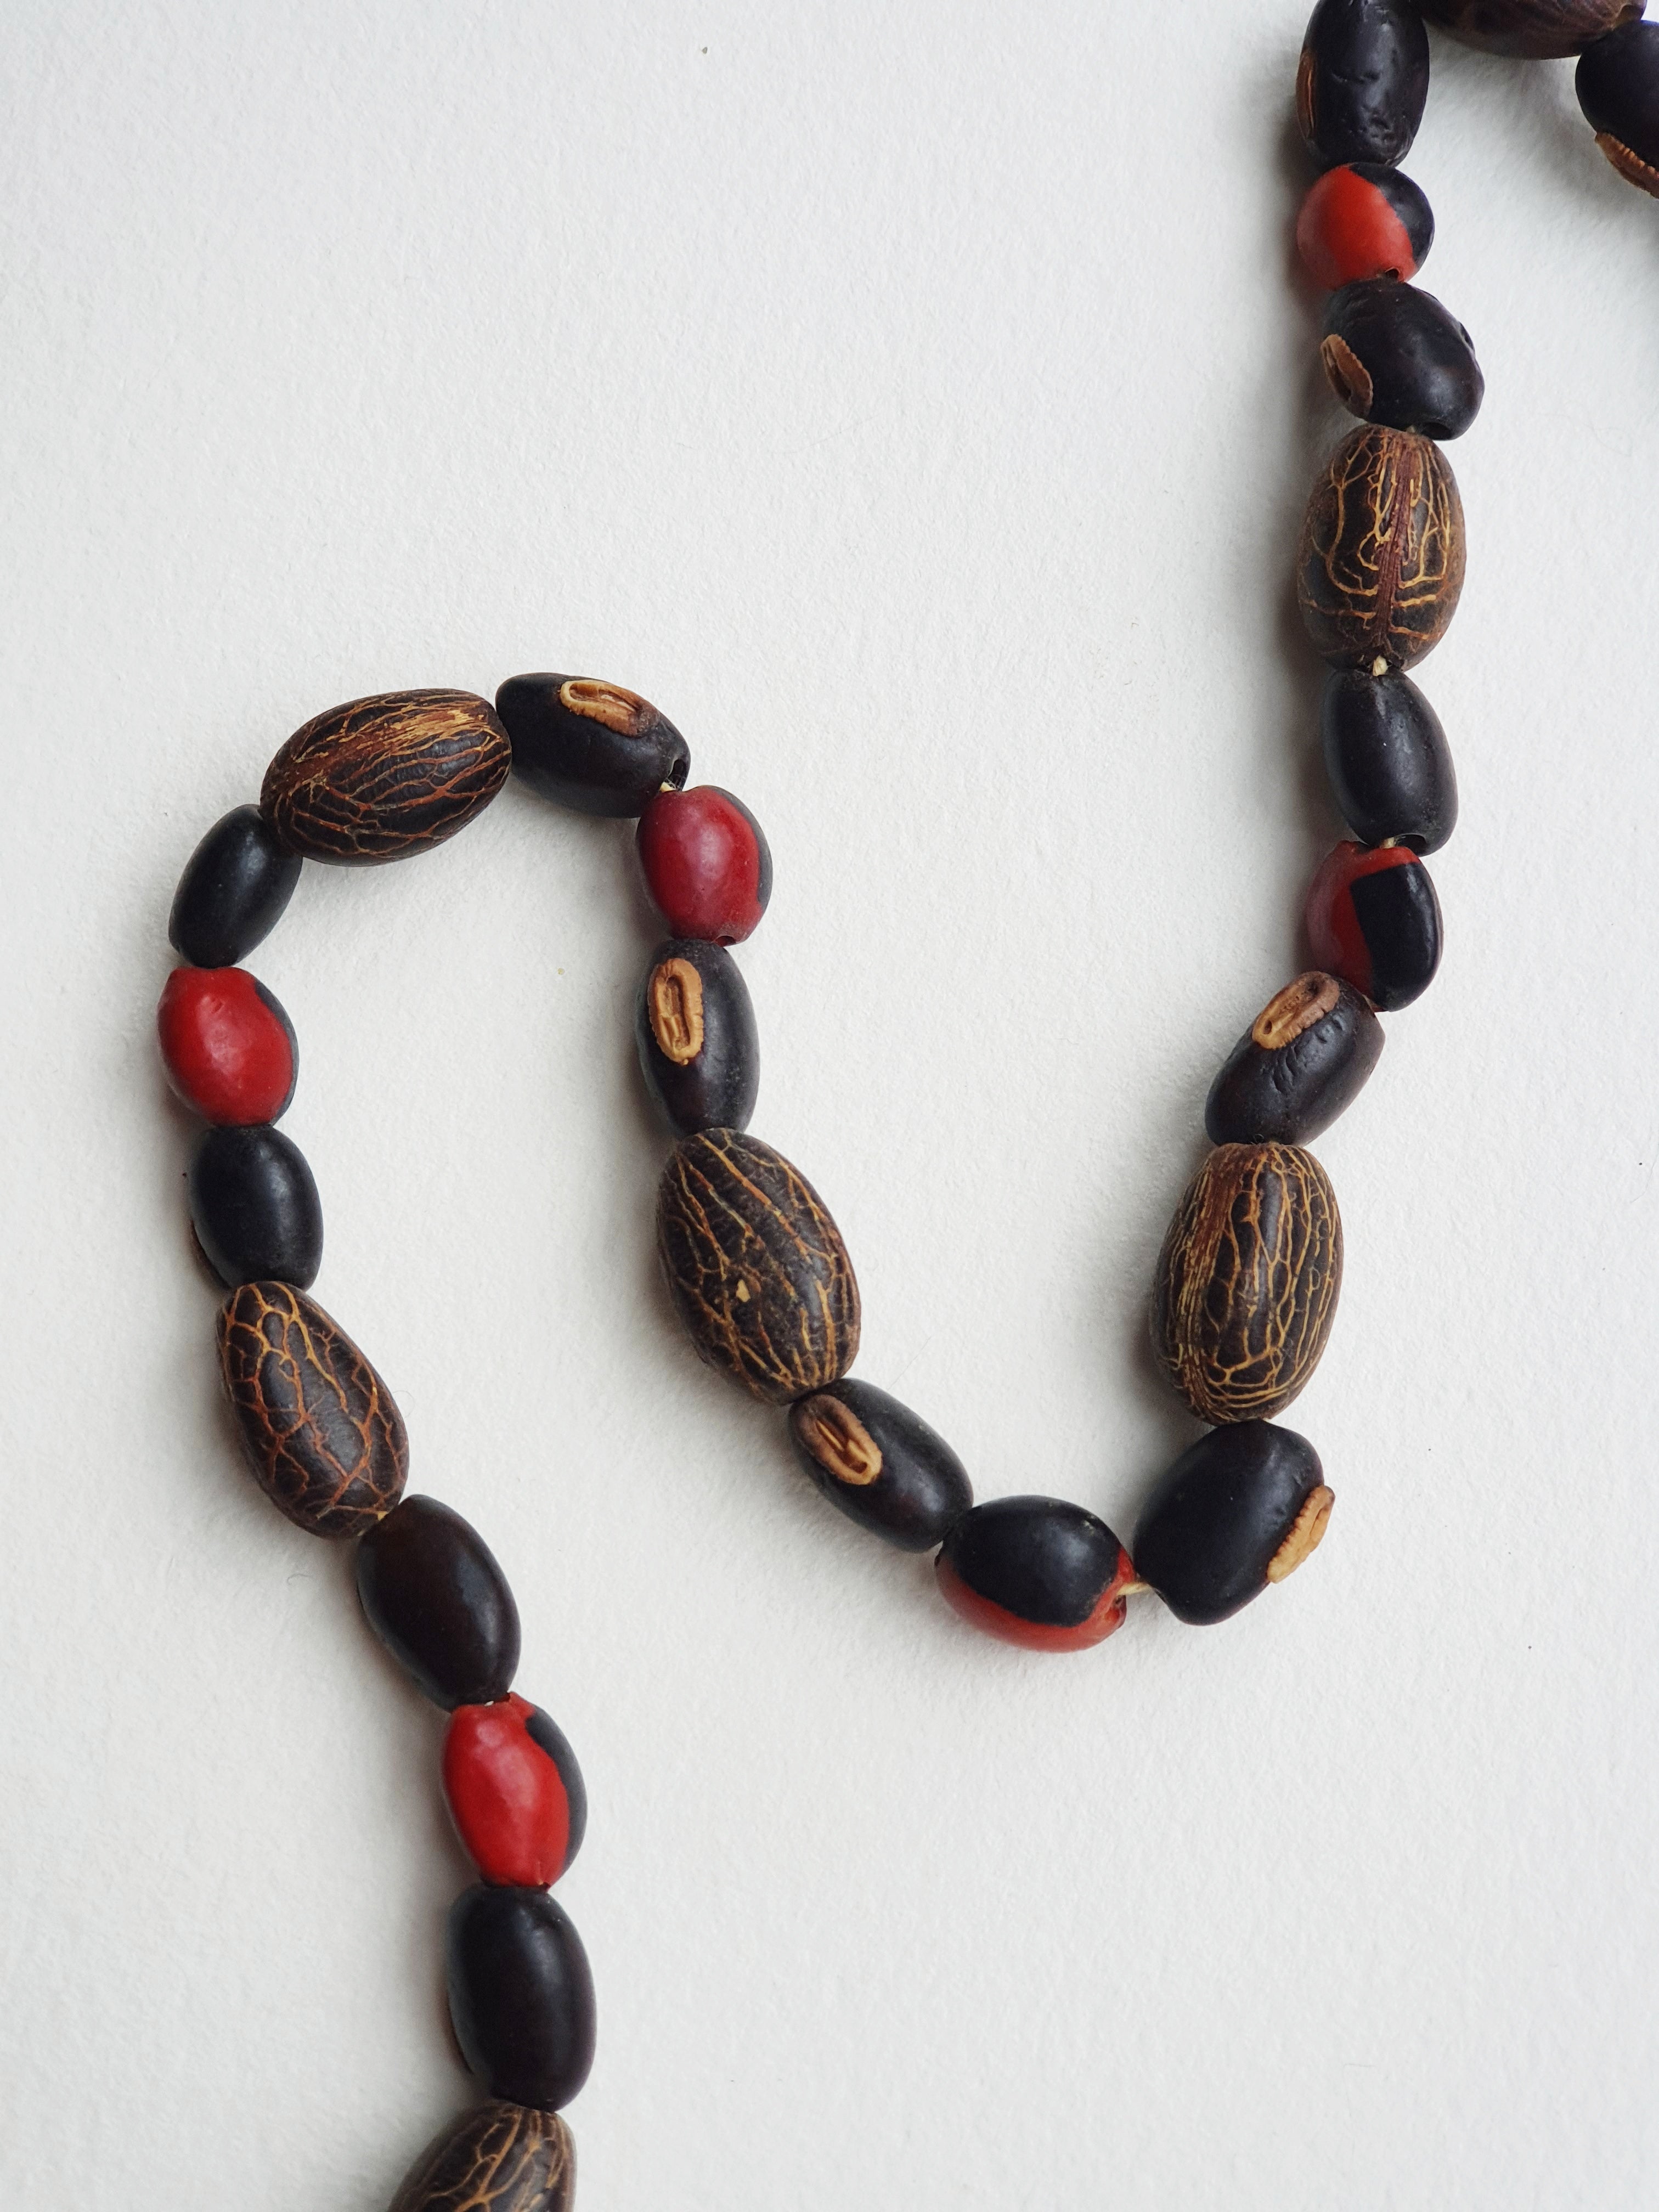 Vintage seed necklace